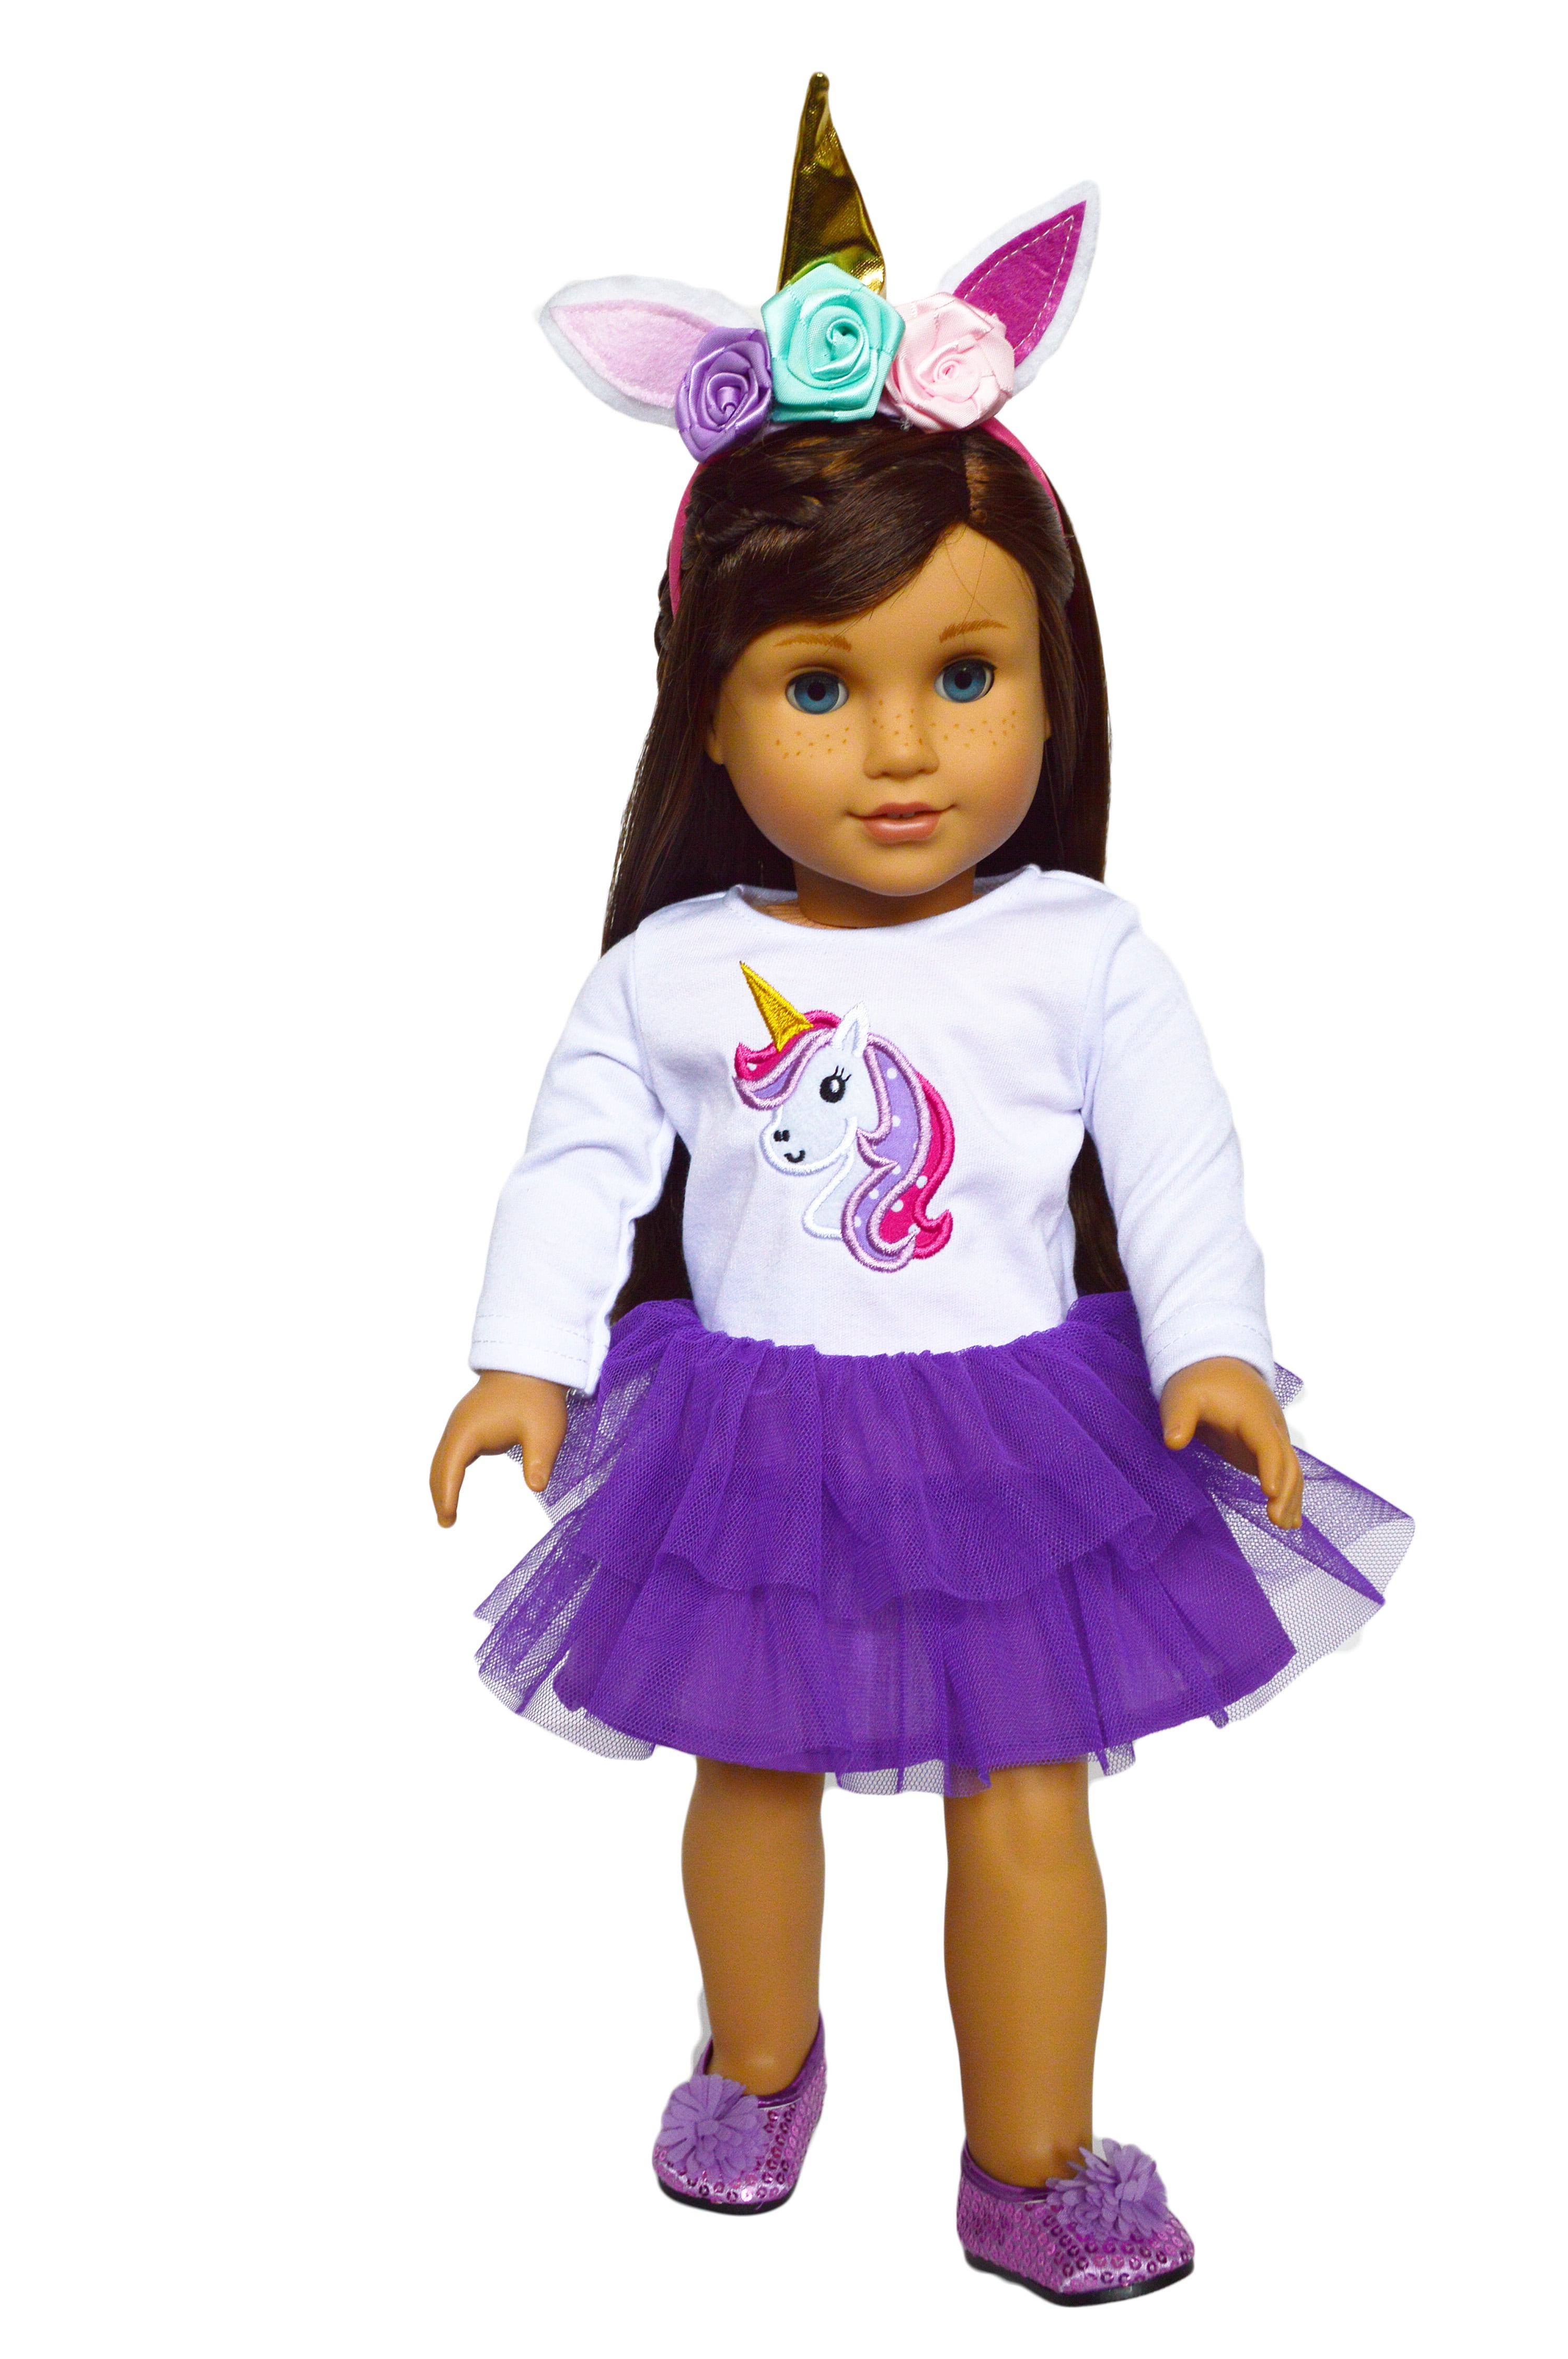 made to fit 18 inch dolls such as American Girl Dolls and similar size dolls Leggings and tee shirt outfit purple and lavendar